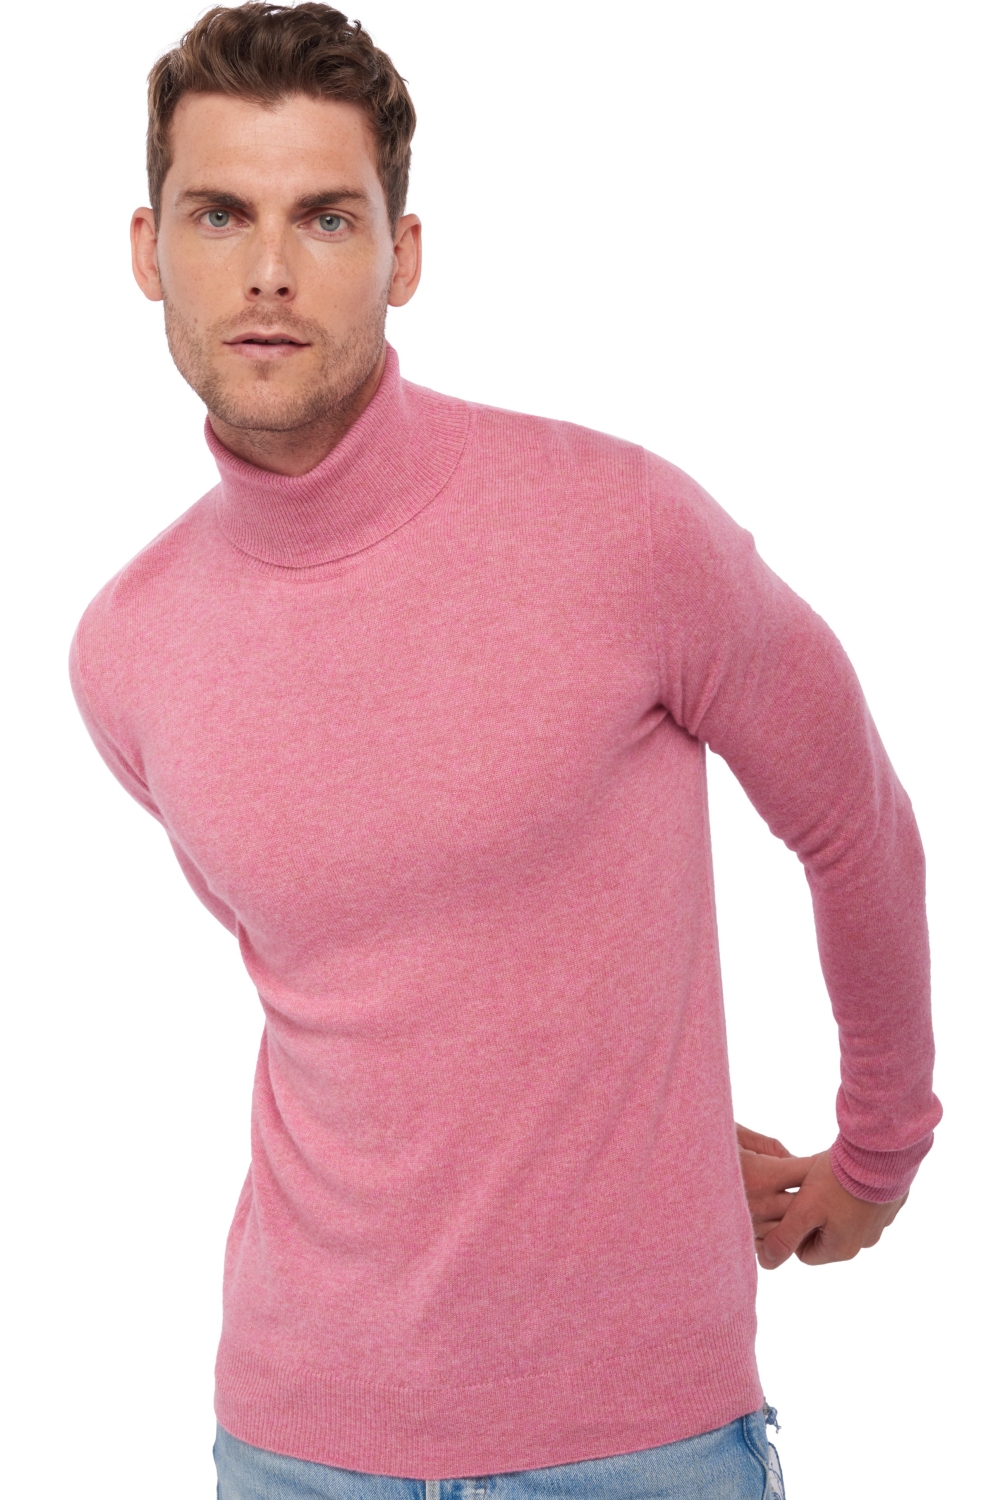 Cachemire pull homme col roule tarry first carnation pink 2xl